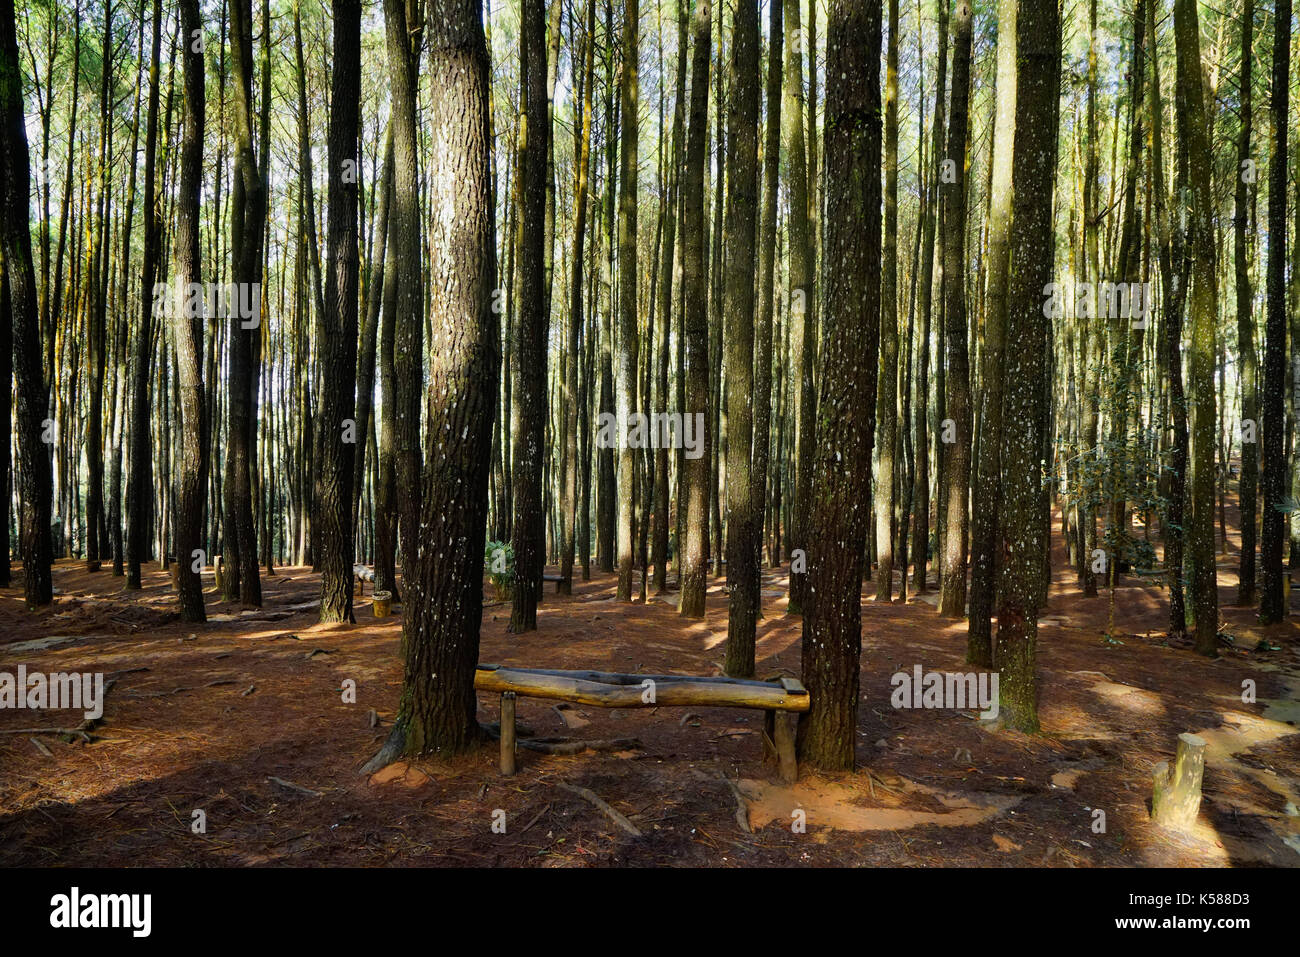 Many tall thin green trees growing in the forest on brown soil in the morning with nobody around. Stock Photo